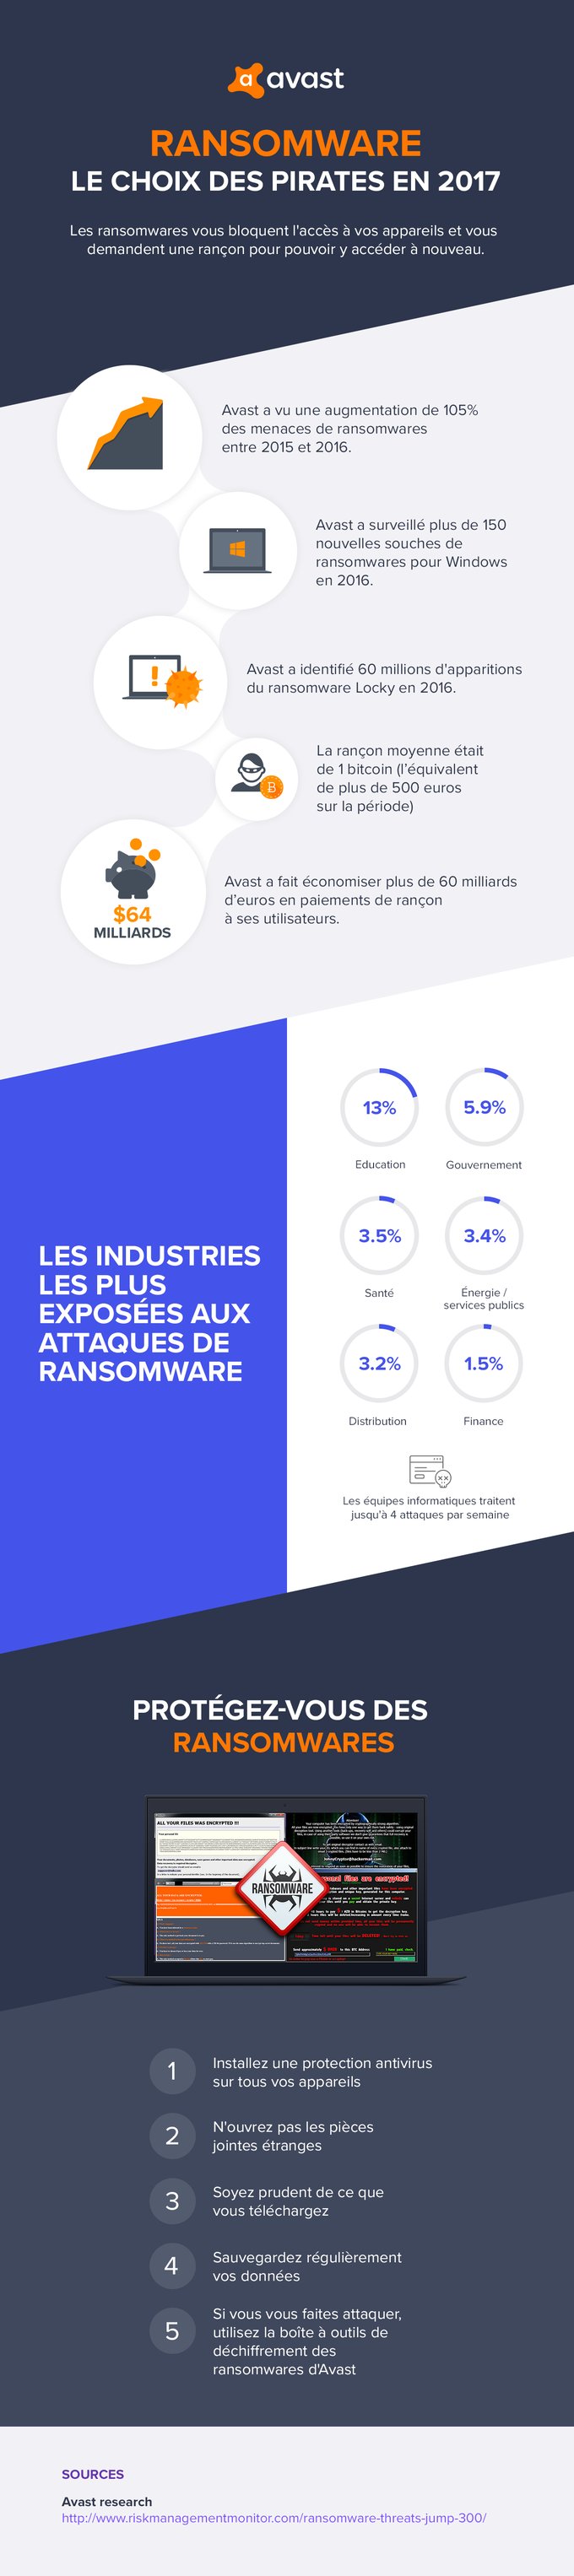 Infographie-ransomware-2017-Avast.png